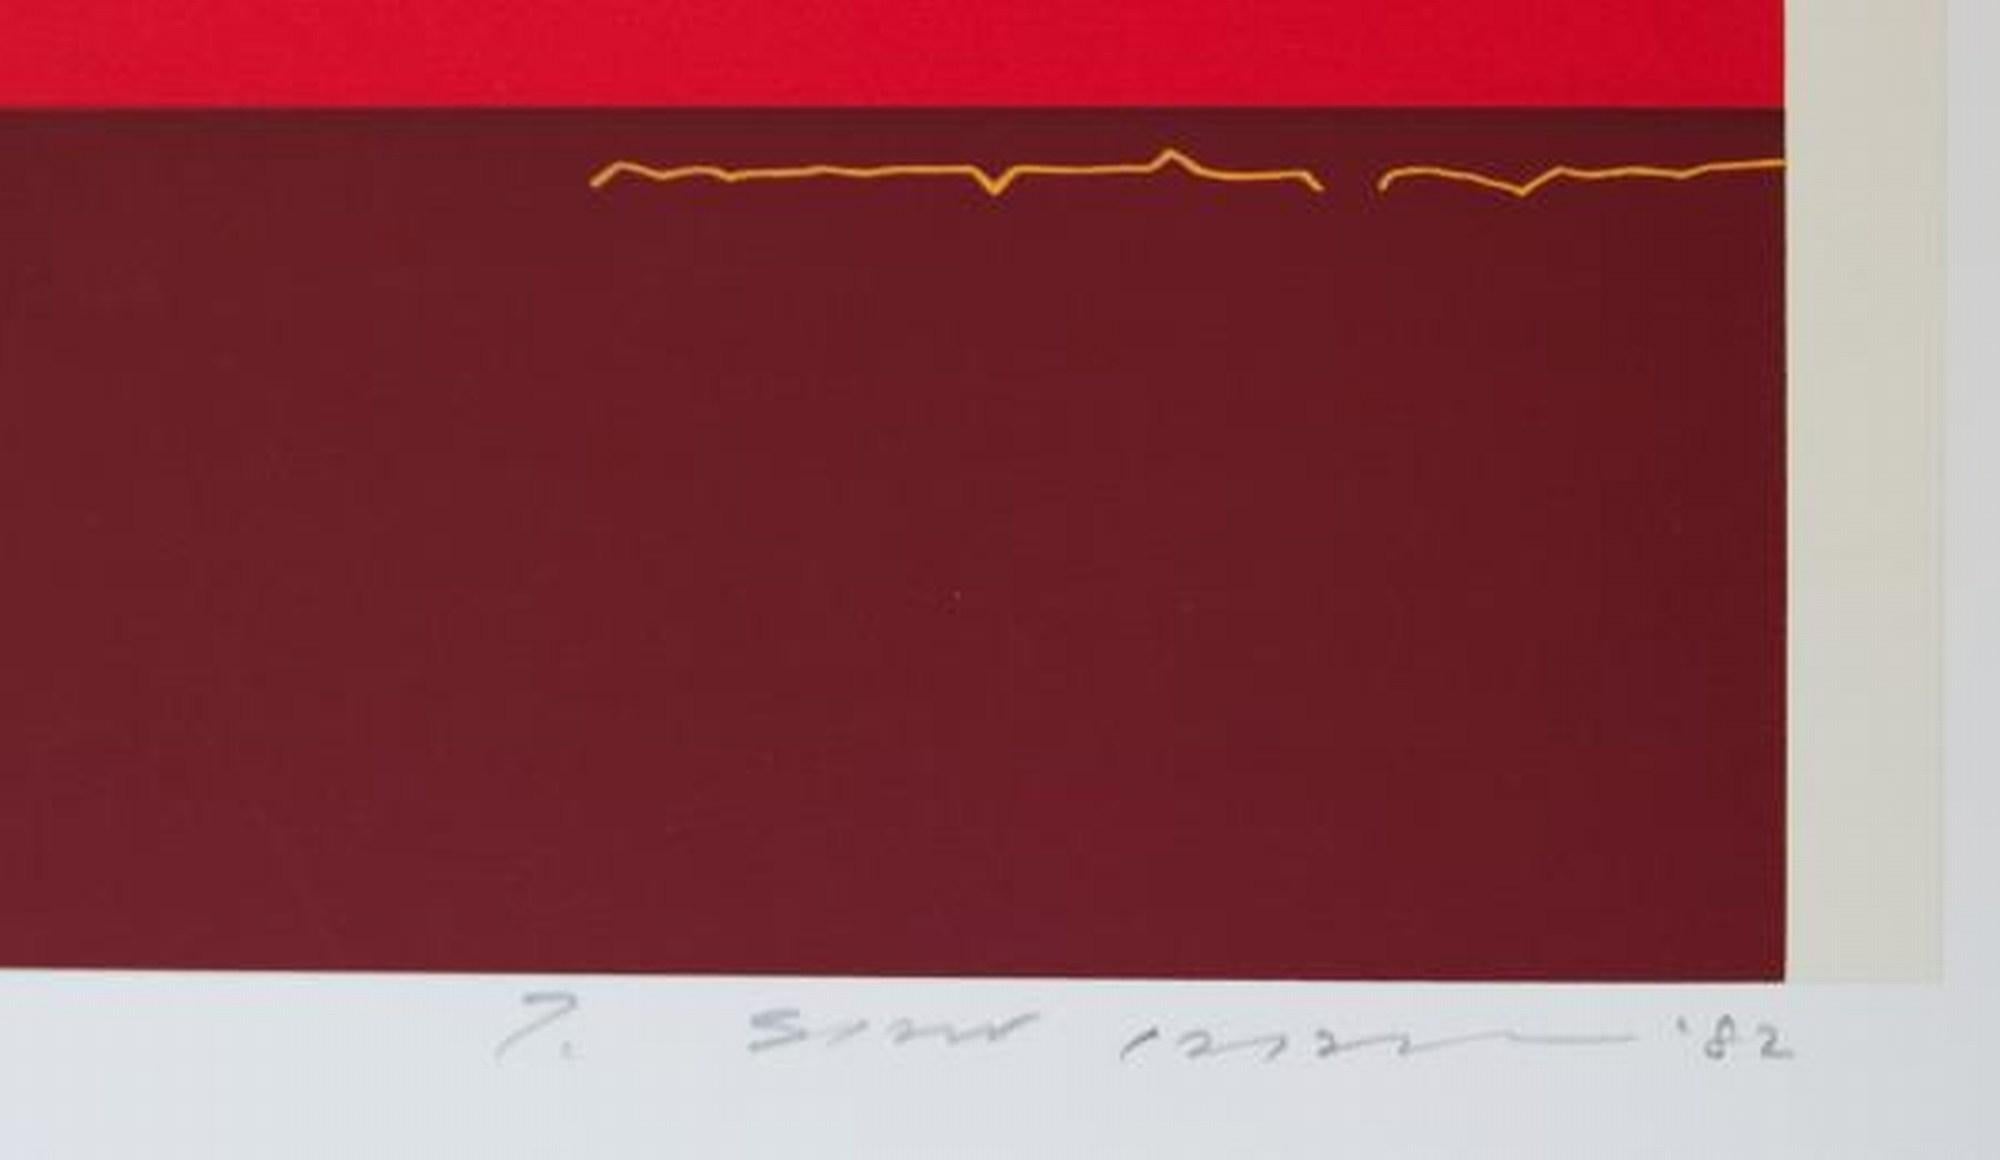 Tetsuro Sawada 
Title: Affinity 
Year: 1982
Edition: 15/35 
Signed, numbered and dated in pencil.
Image: 18.8 x 13.5 in
Paper: 24.5 x 17.25 in
COA Provided

A good example of the Tetsuro Sawada's theme of the infinite beyond, the silent emptiness of